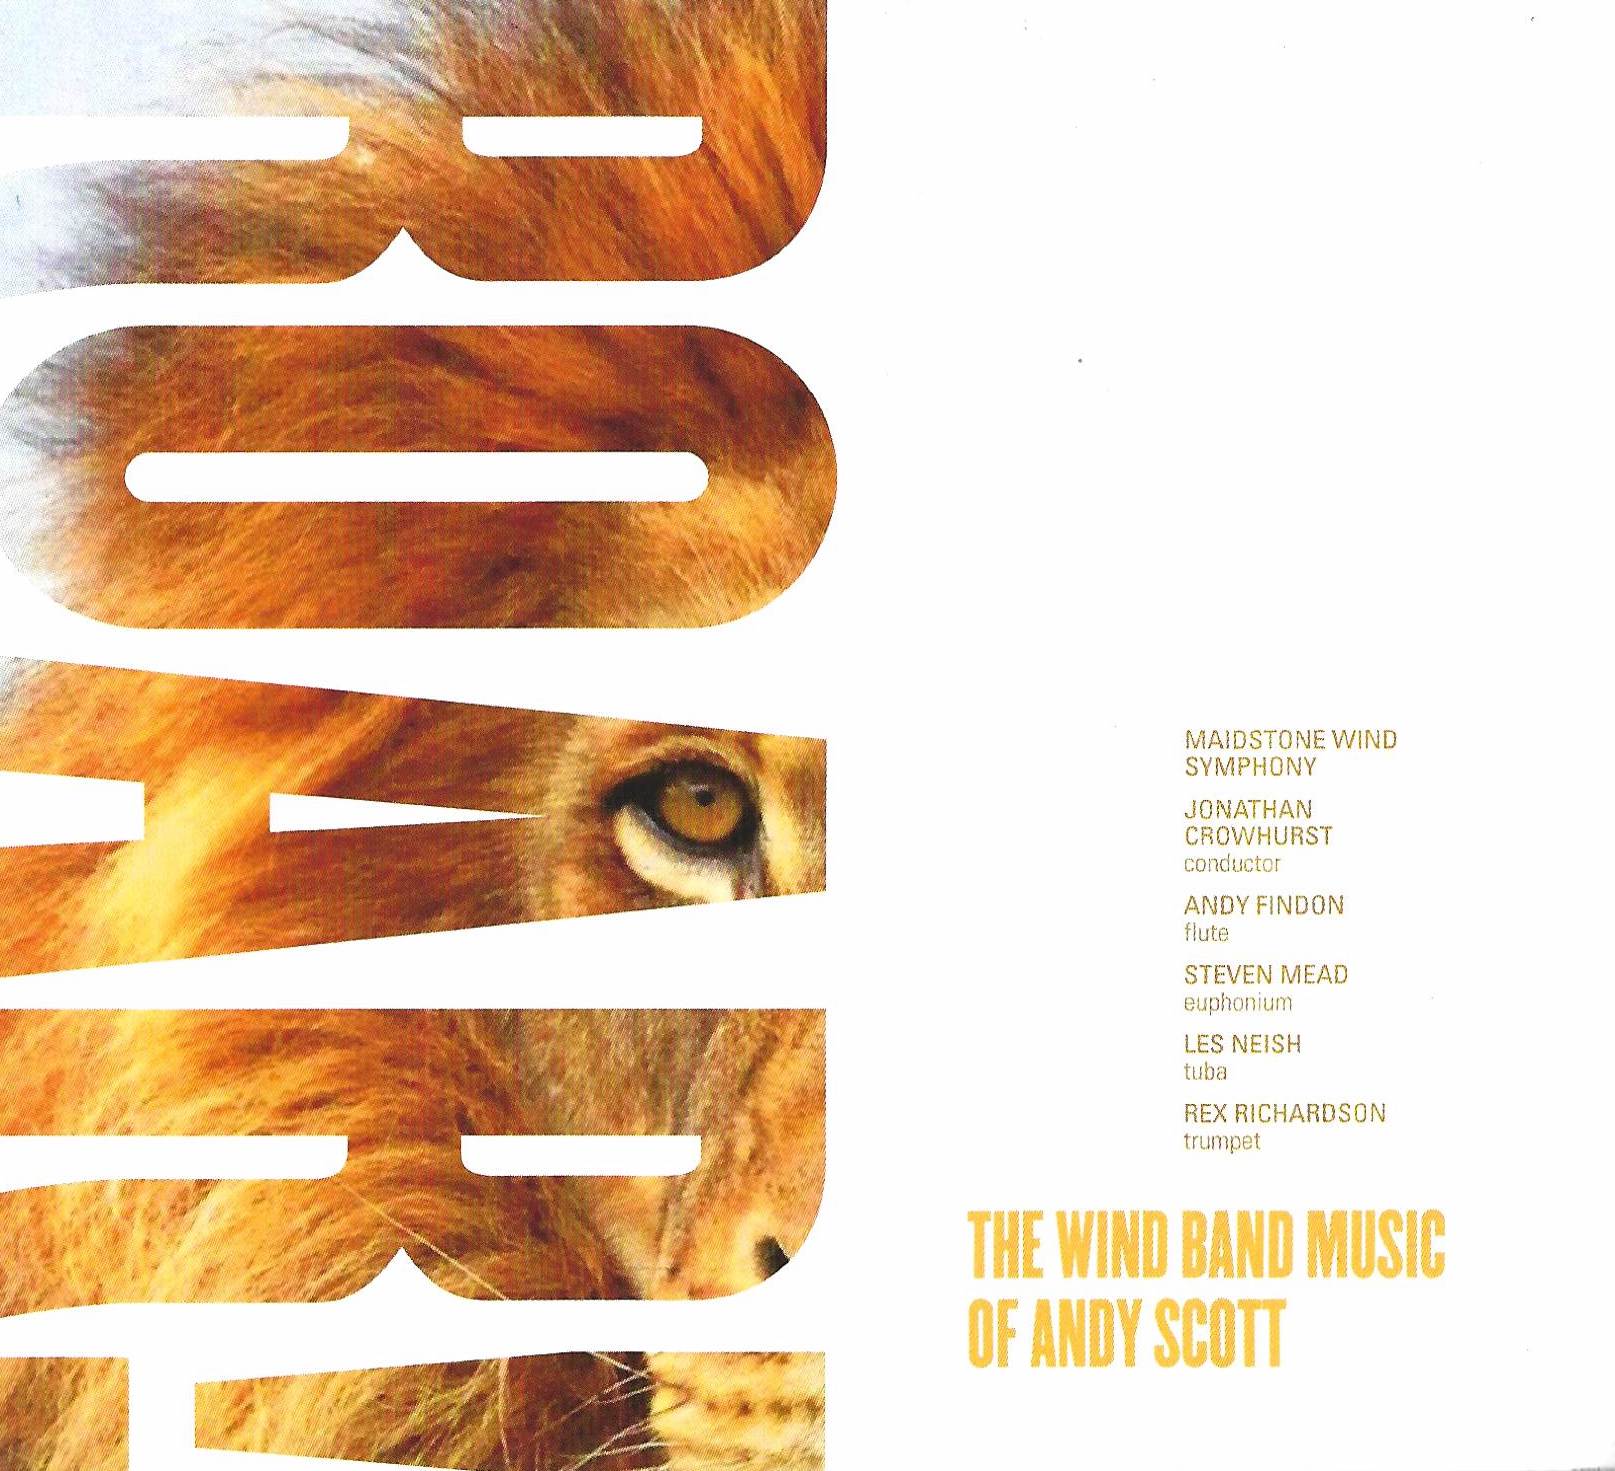 CD - ROAR! - The Wind Band Music of Andy Scott - Steven Mead, Rex Richardson, Les Neish, Andy Findon and the Maidstone Wind Symphony